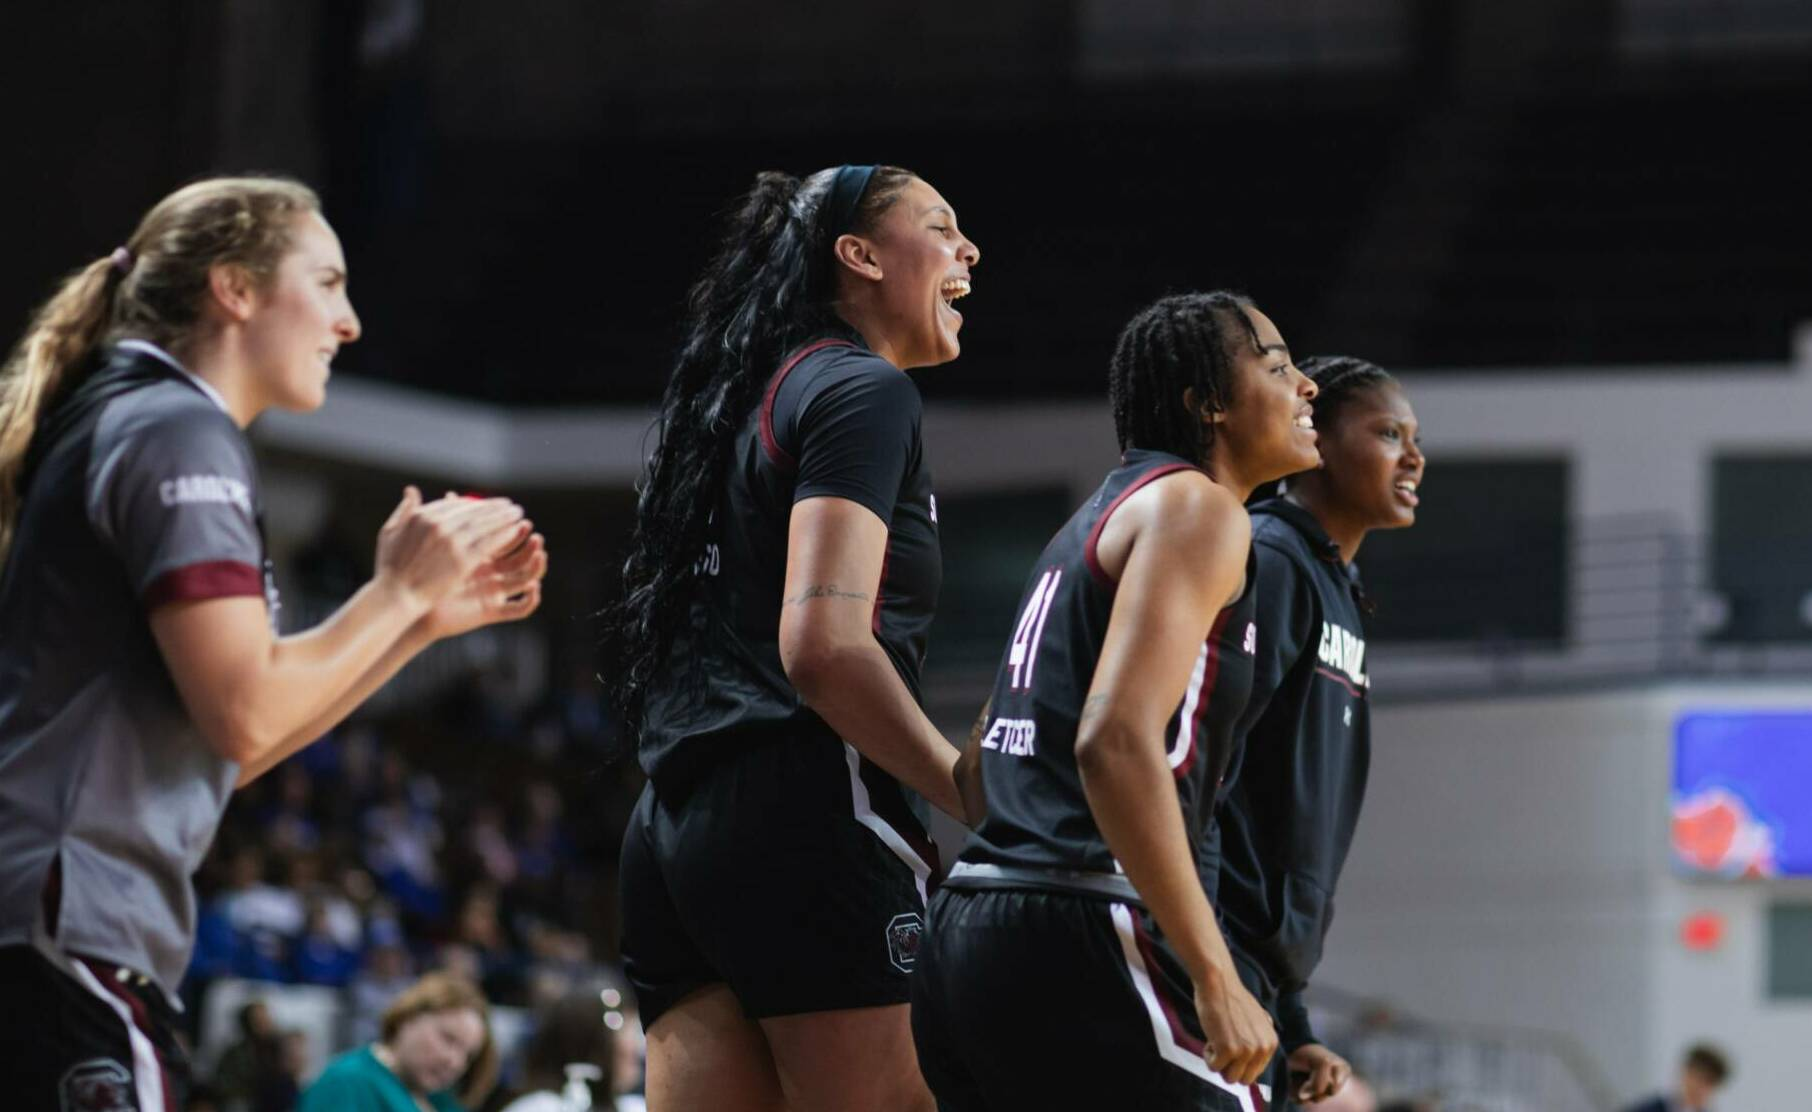 Boston, Cooke lead No. 1 South Carolina in rout of Kentucky